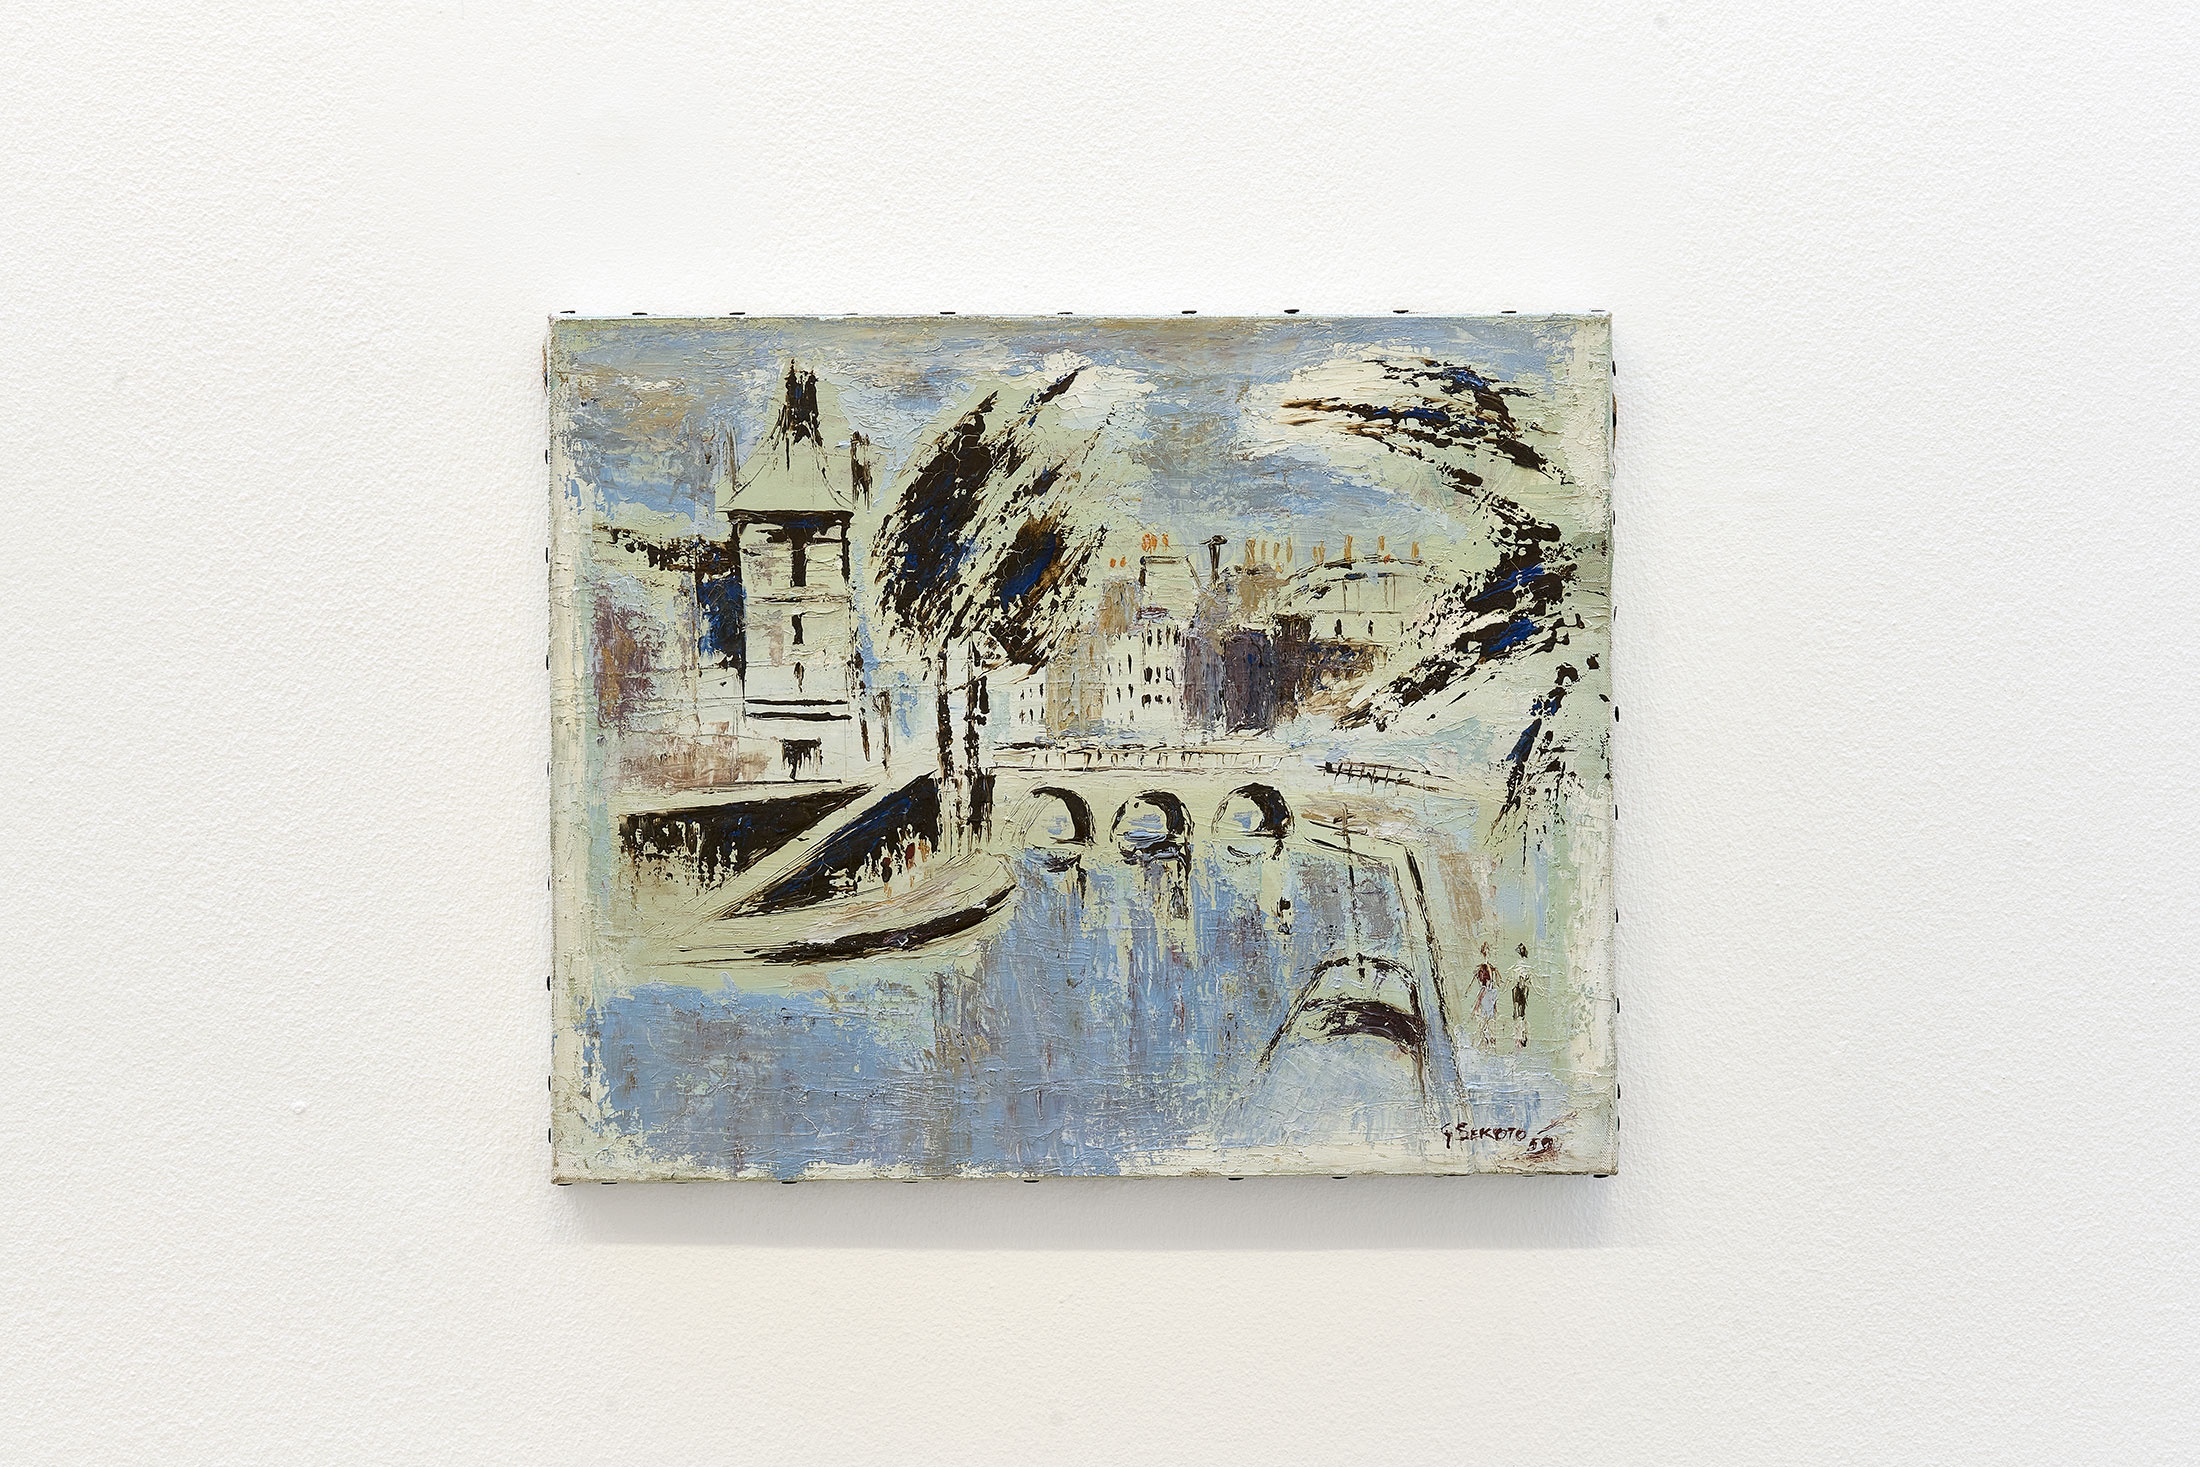 Installation photograph from the 'A Little After This' exhibition in A4 Arts Foundation's gallery that shows Gerard Sekoto's oil on canvas painting 'Le Pont St. Michel' mounted on a white gallery wall.
